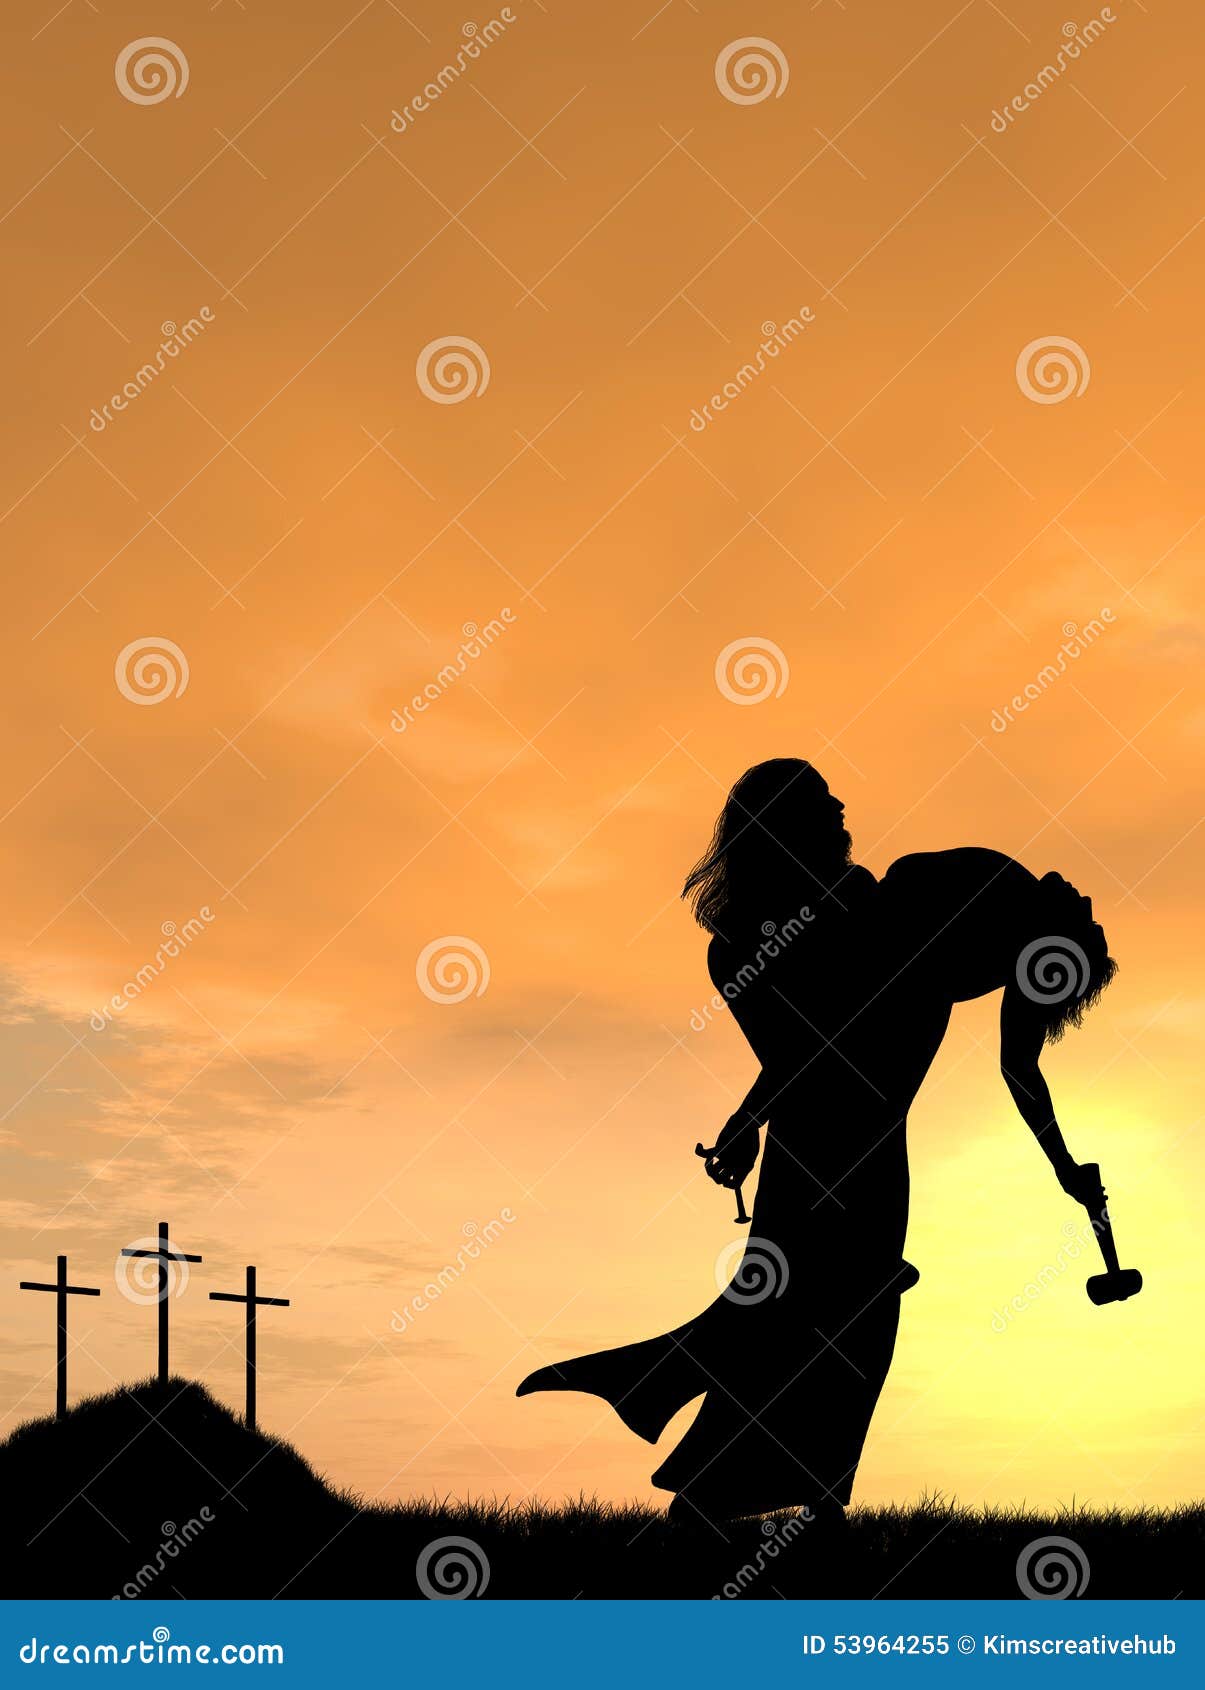 clipart jesus holding a man up - photo #19